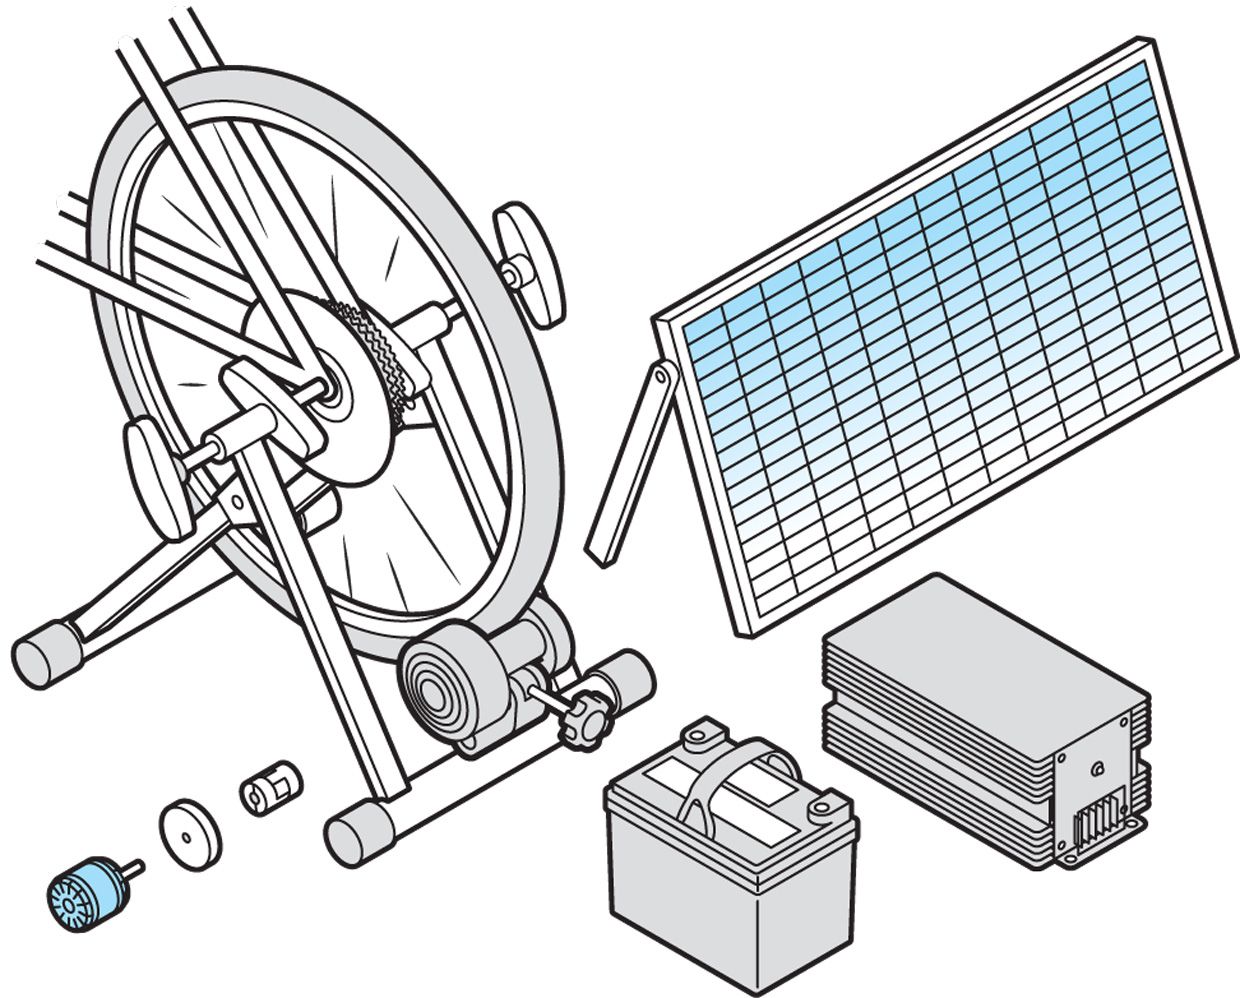 The components needed to build a pedal-powered power backup system.